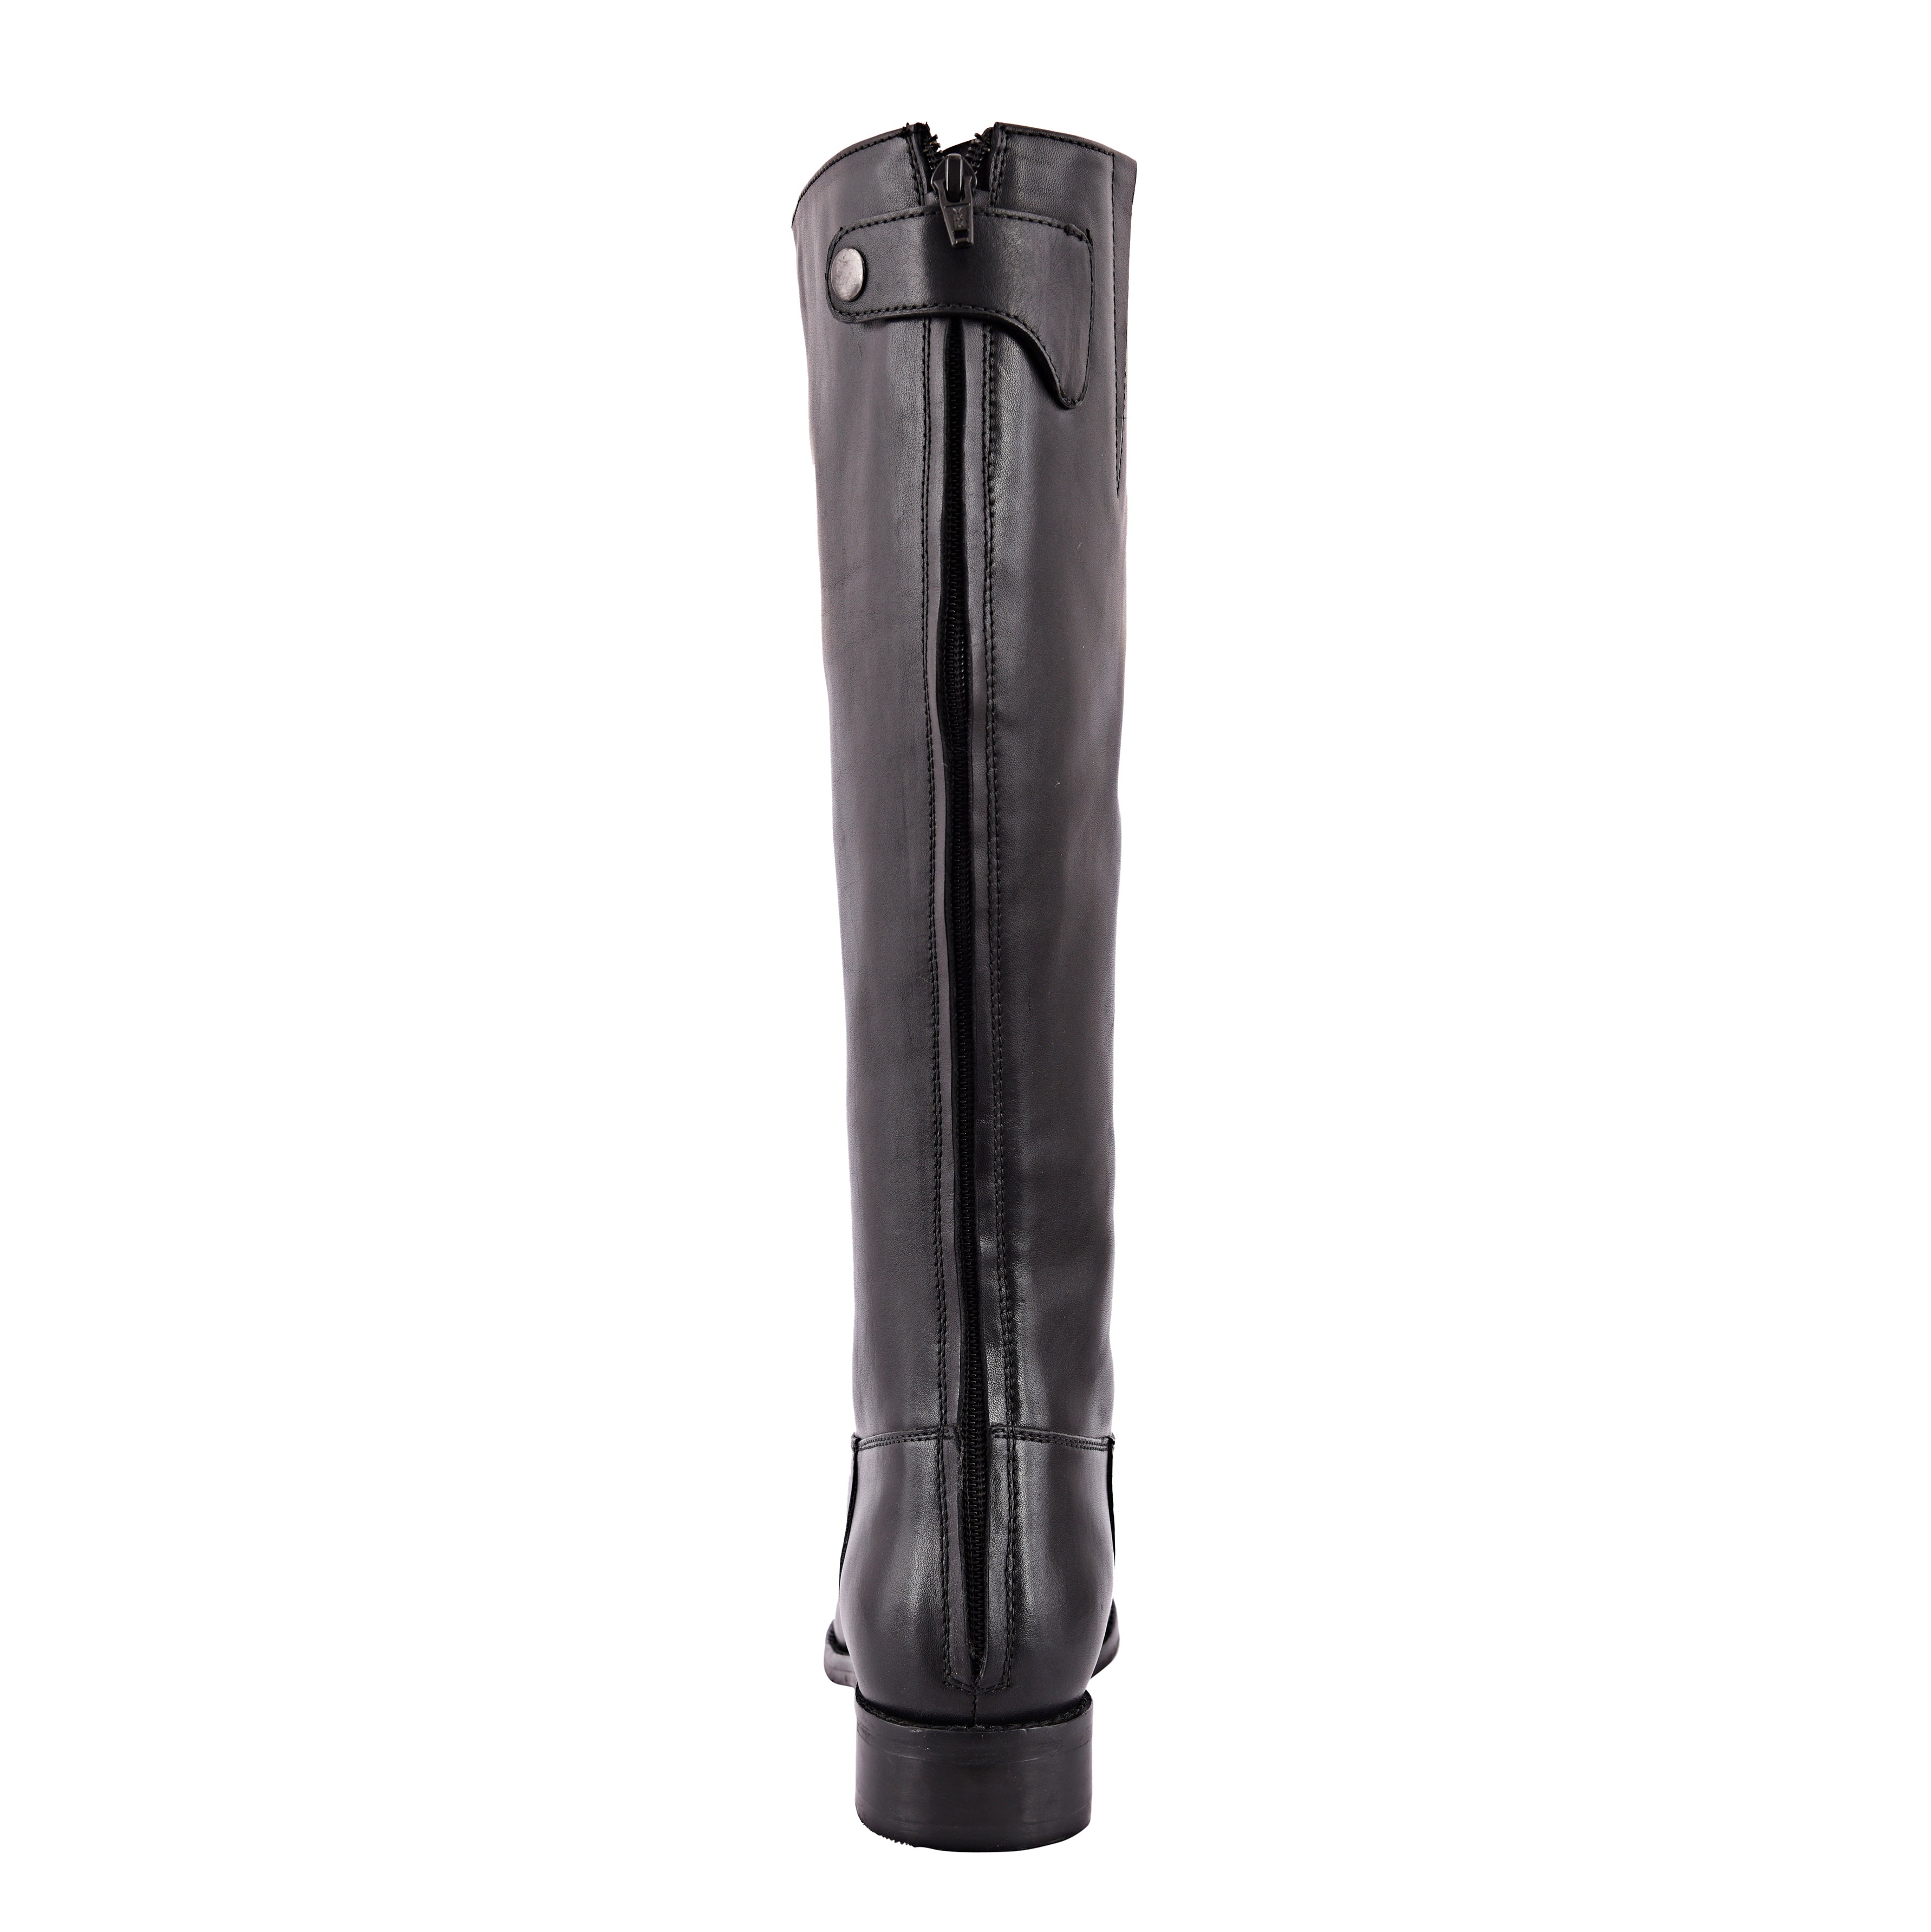 Amata Classic Knee High Riding Boots